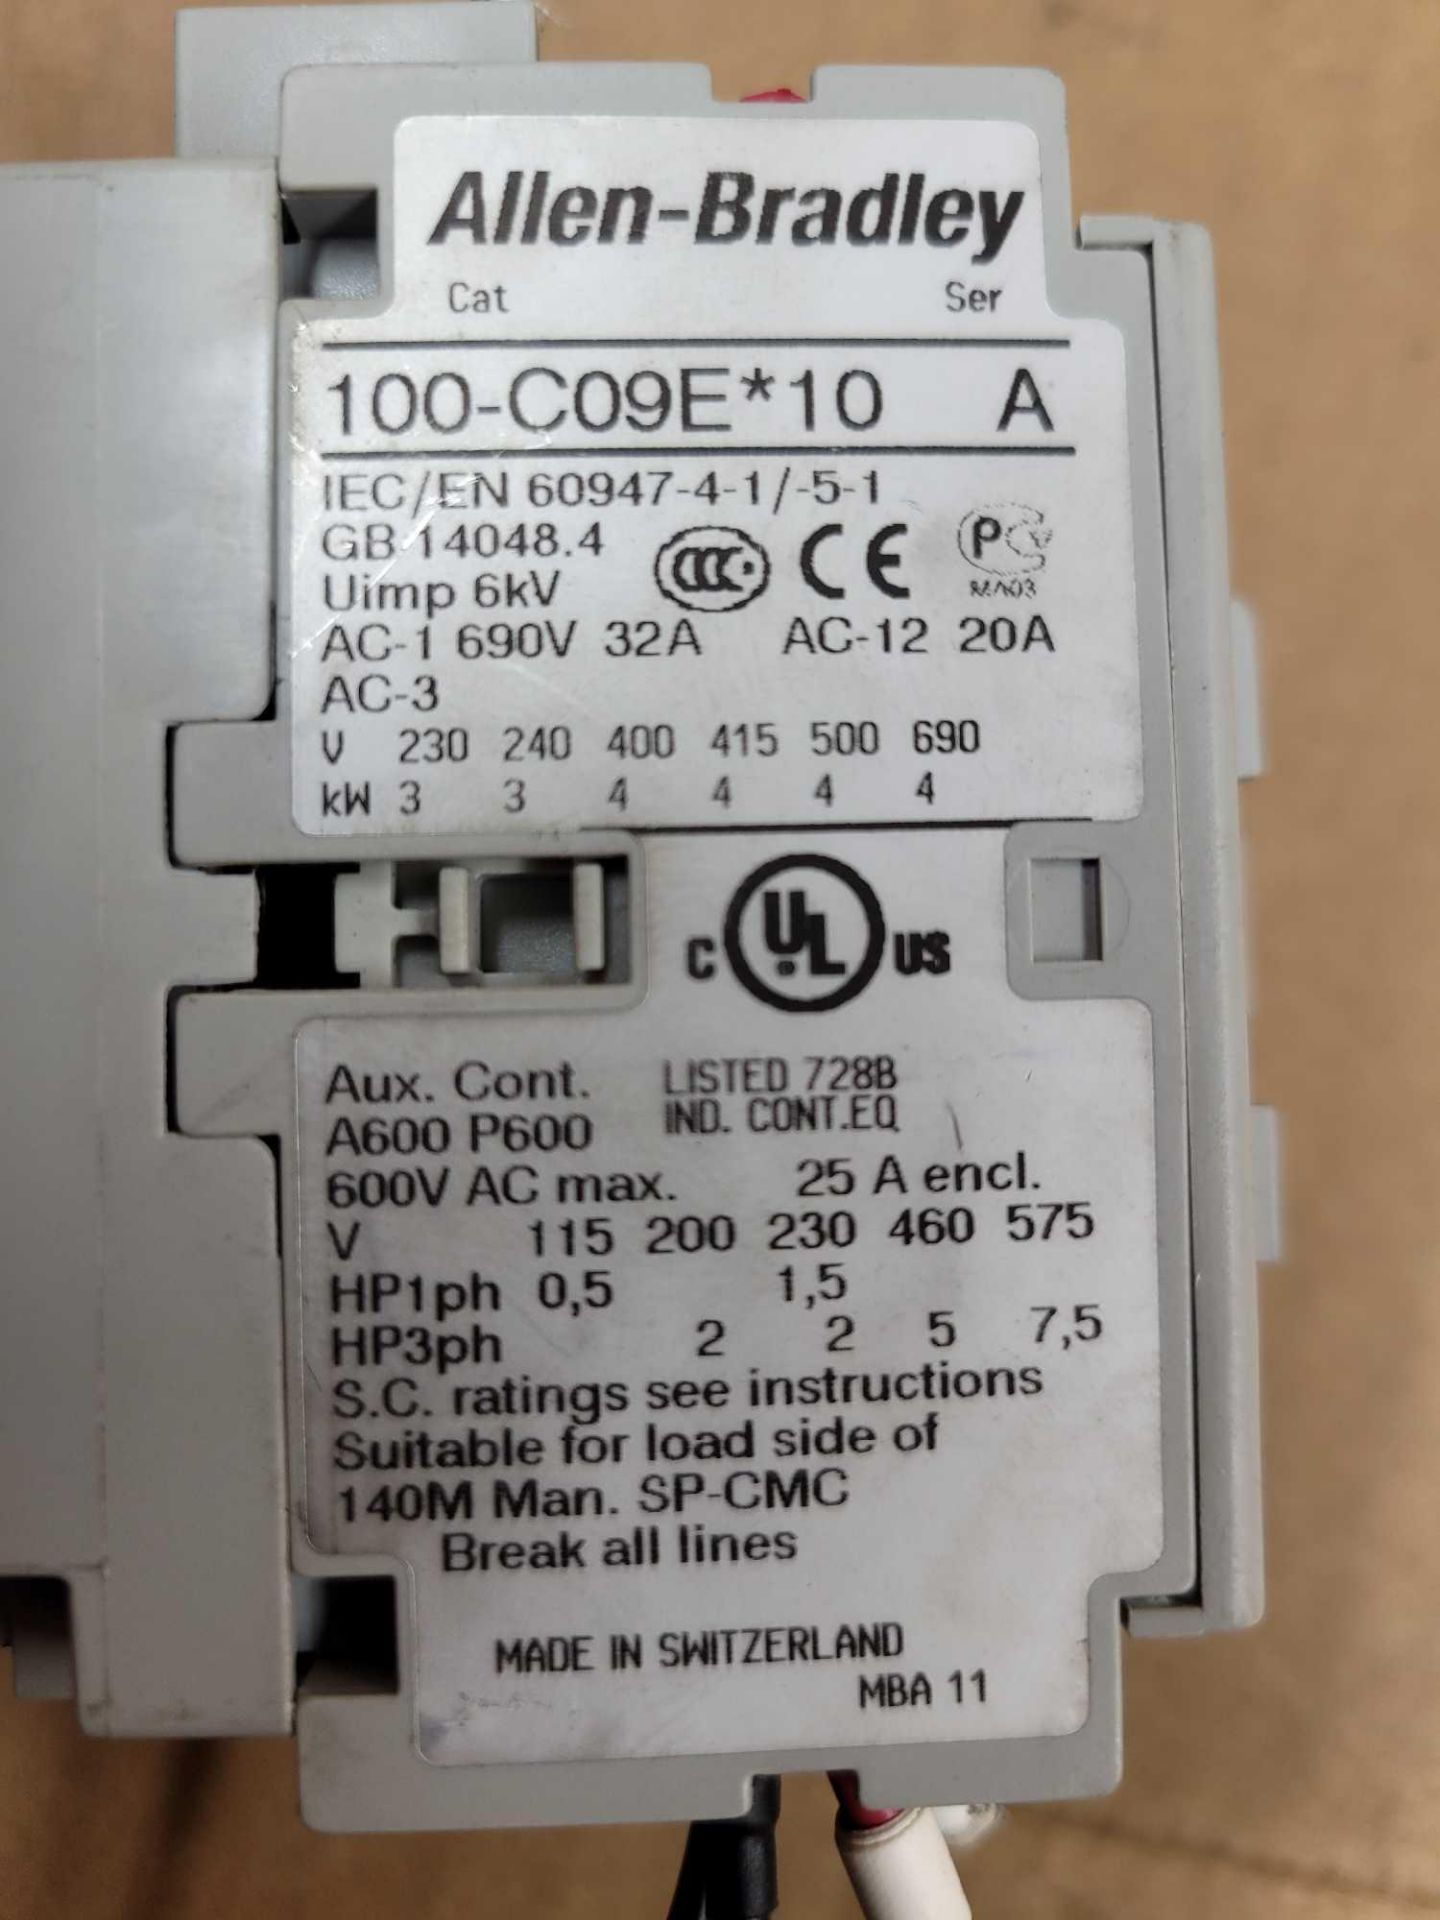 LOT OF 6 ALLEN BRADLEY 100-C09E*10 / Series A Contactor  /  Lot Weight: 5.2 lbs - Image 2 of 8